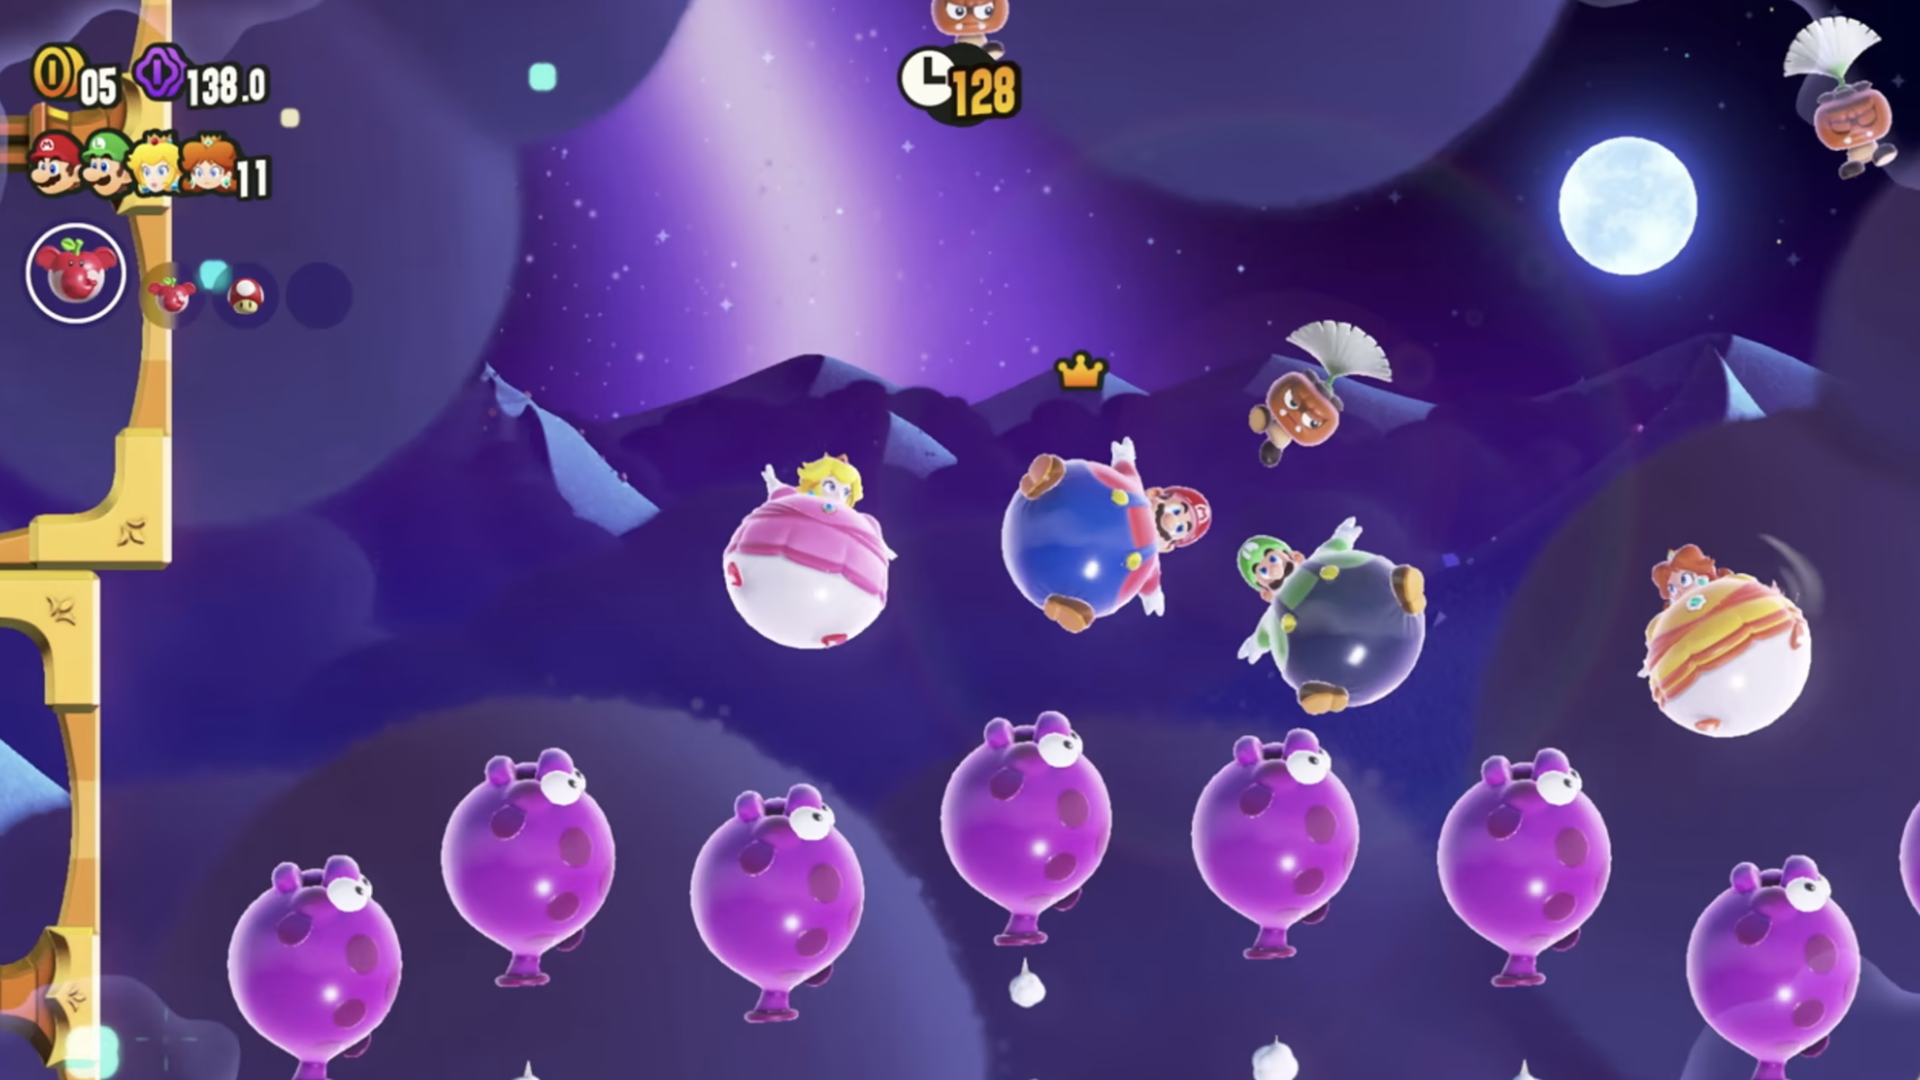 Video game screenshot of Mario, Luigi and Princess Peach inflated like balloons, floating in a purple sky